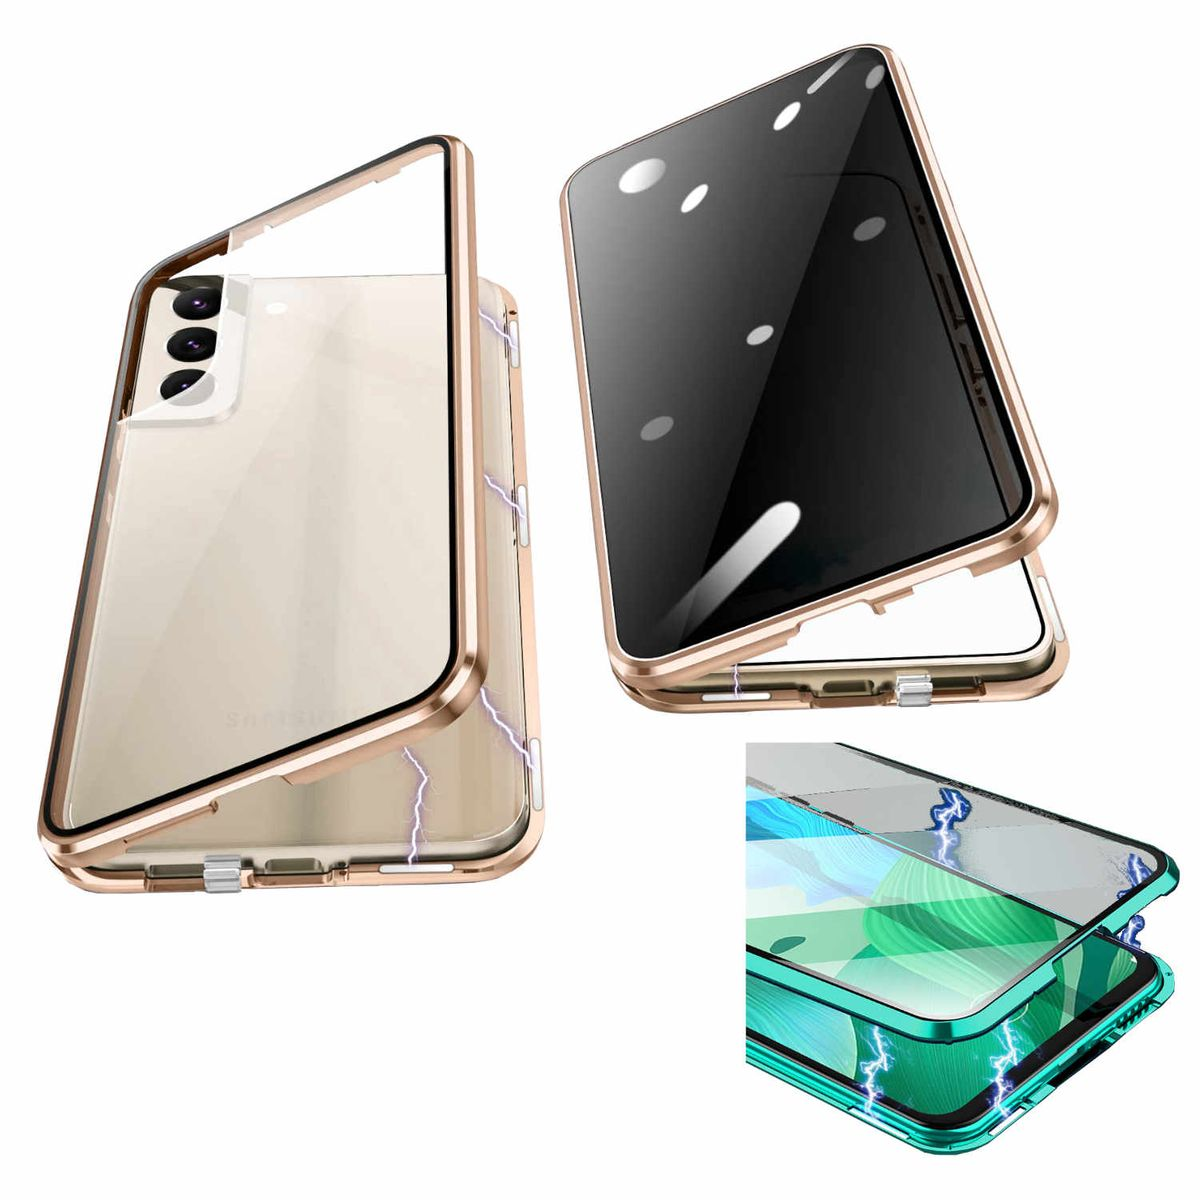 Glas / S23 360 Privacy Cover, WIGENTO Magnet Hülle, Gold Samsung, Galaxy / Grad Full Transparent 5G, Mirror Beidseitige